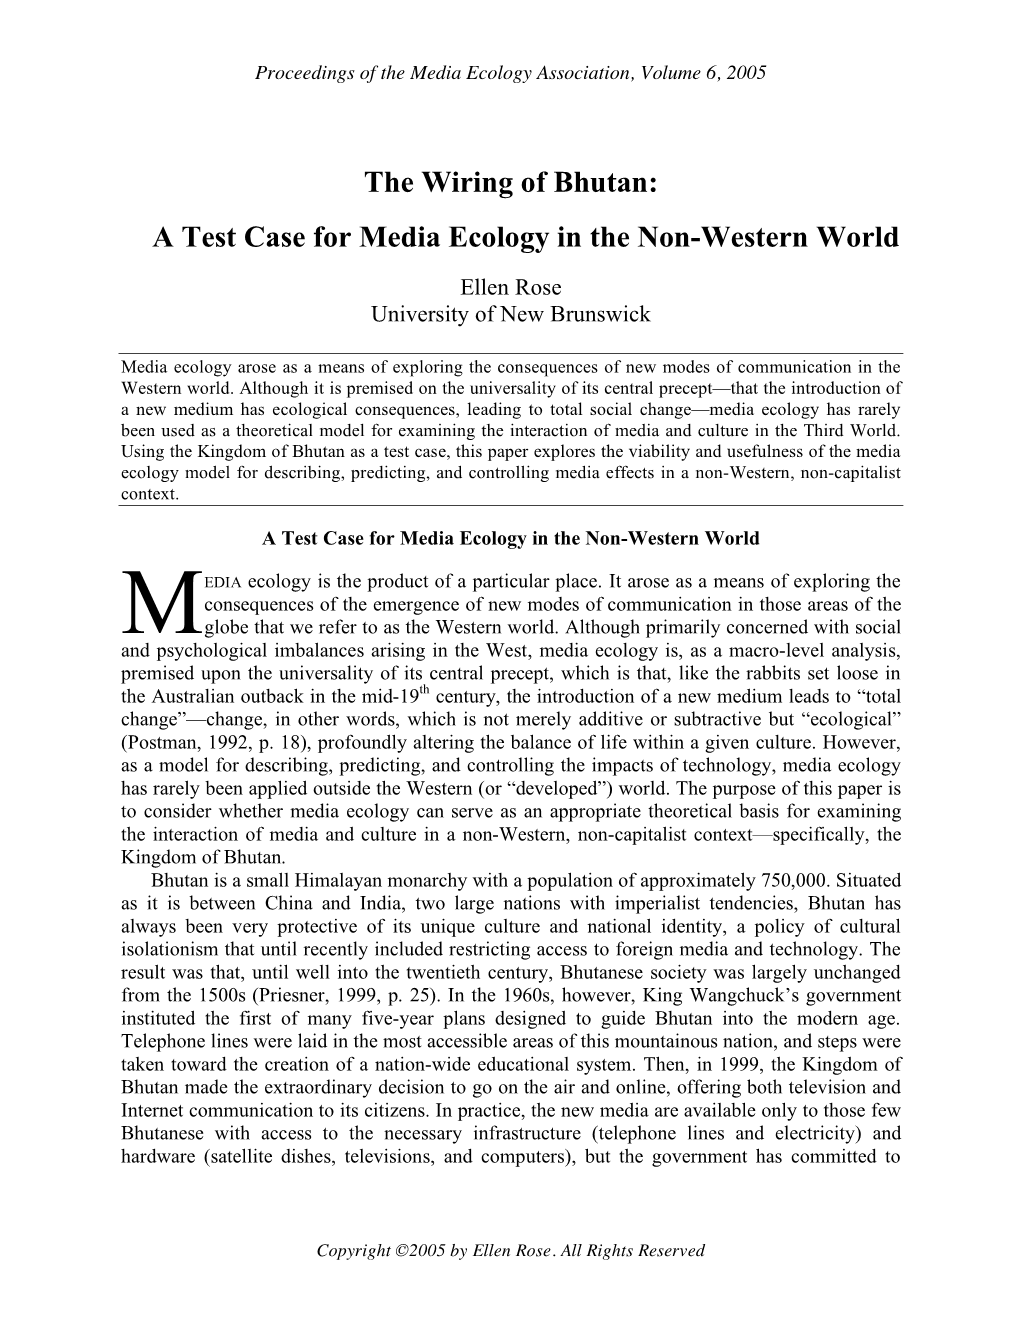 The Wiring of Bhutan: a Test Case for Media Ecology in the Non-Western World